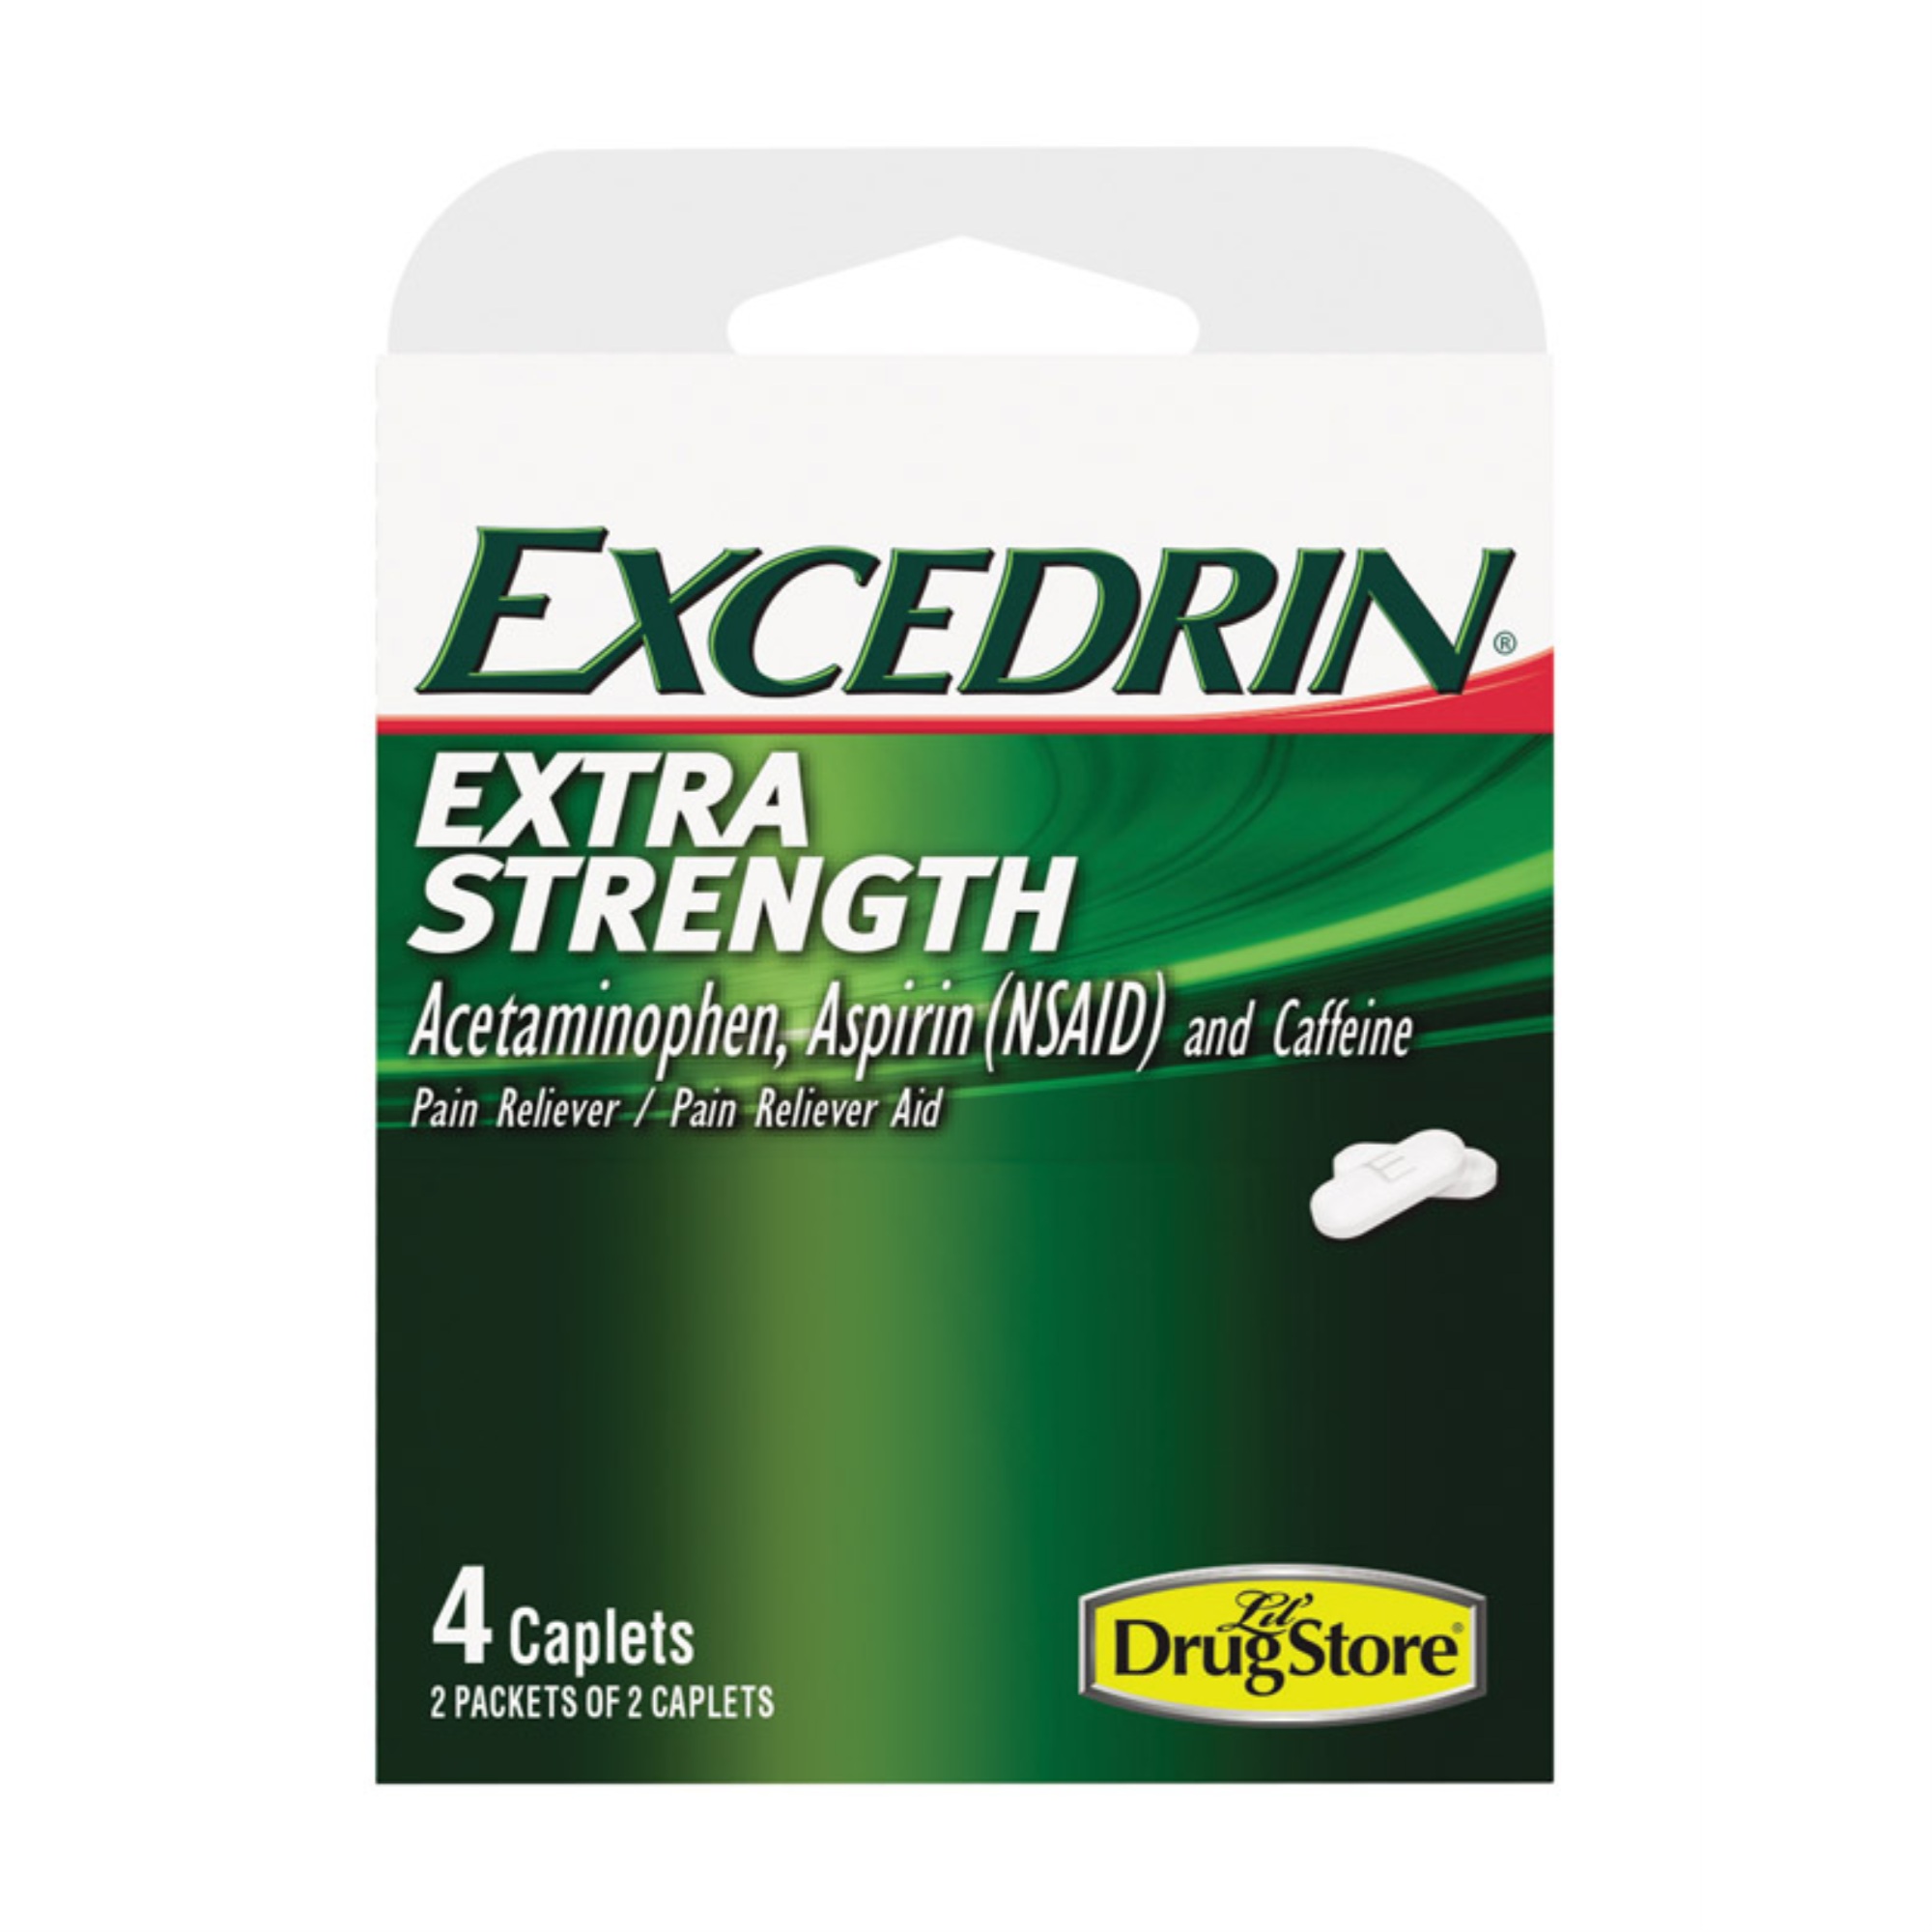 Lil Drug Store Excedrin Extra Strength Acetaminophen & Aspirin Caplets, 4 Count - image 1 of 2